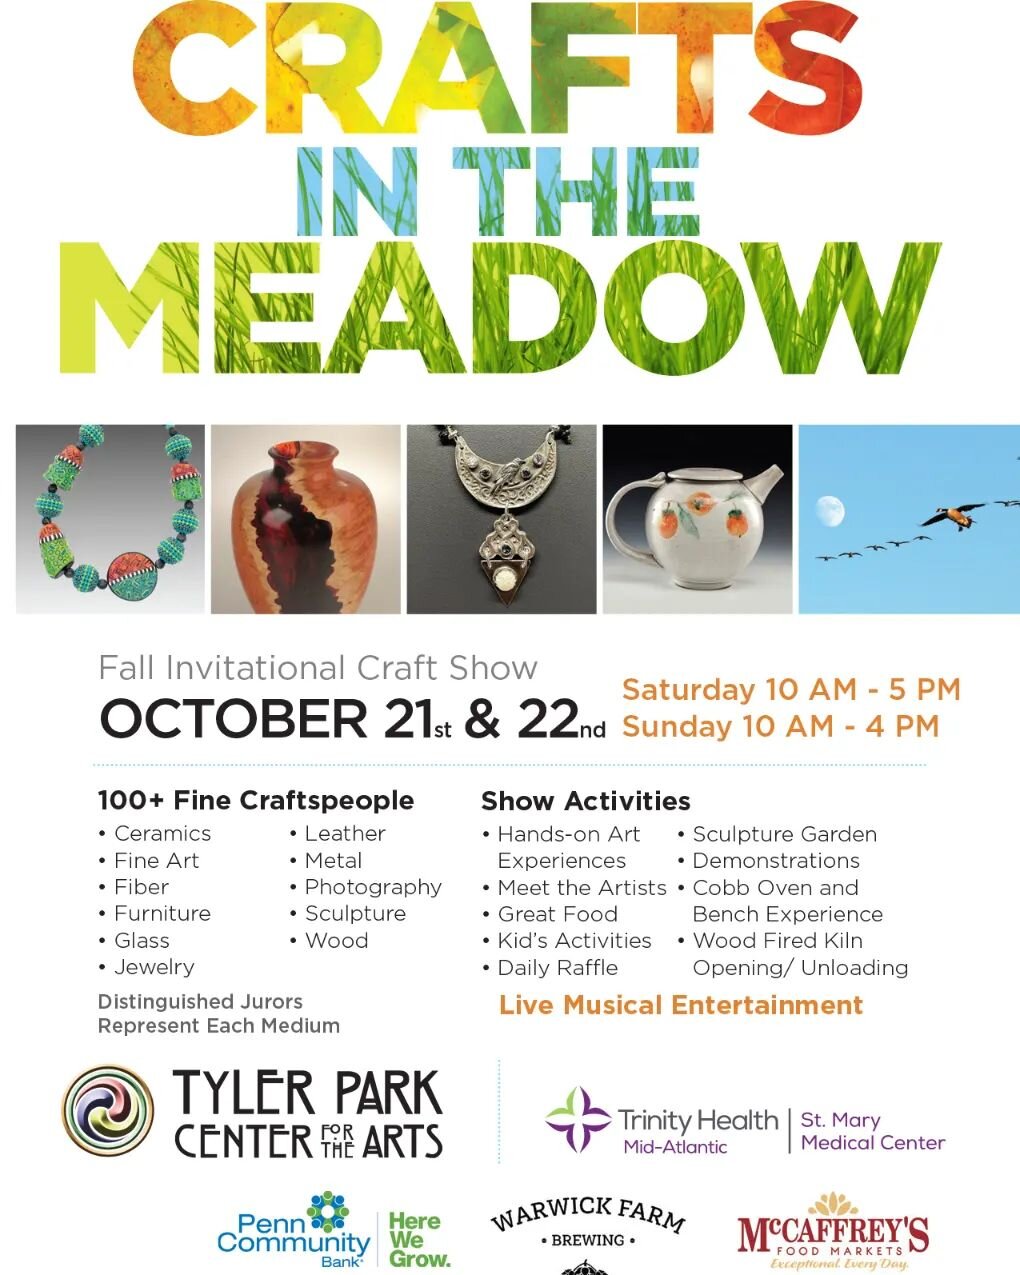 Tyler Park Crafts in the Meadow

Come on out this weekend and say hi. I have some awesome new items that are bound to go fast.

#woodworking #craftshow @tylerparkarts